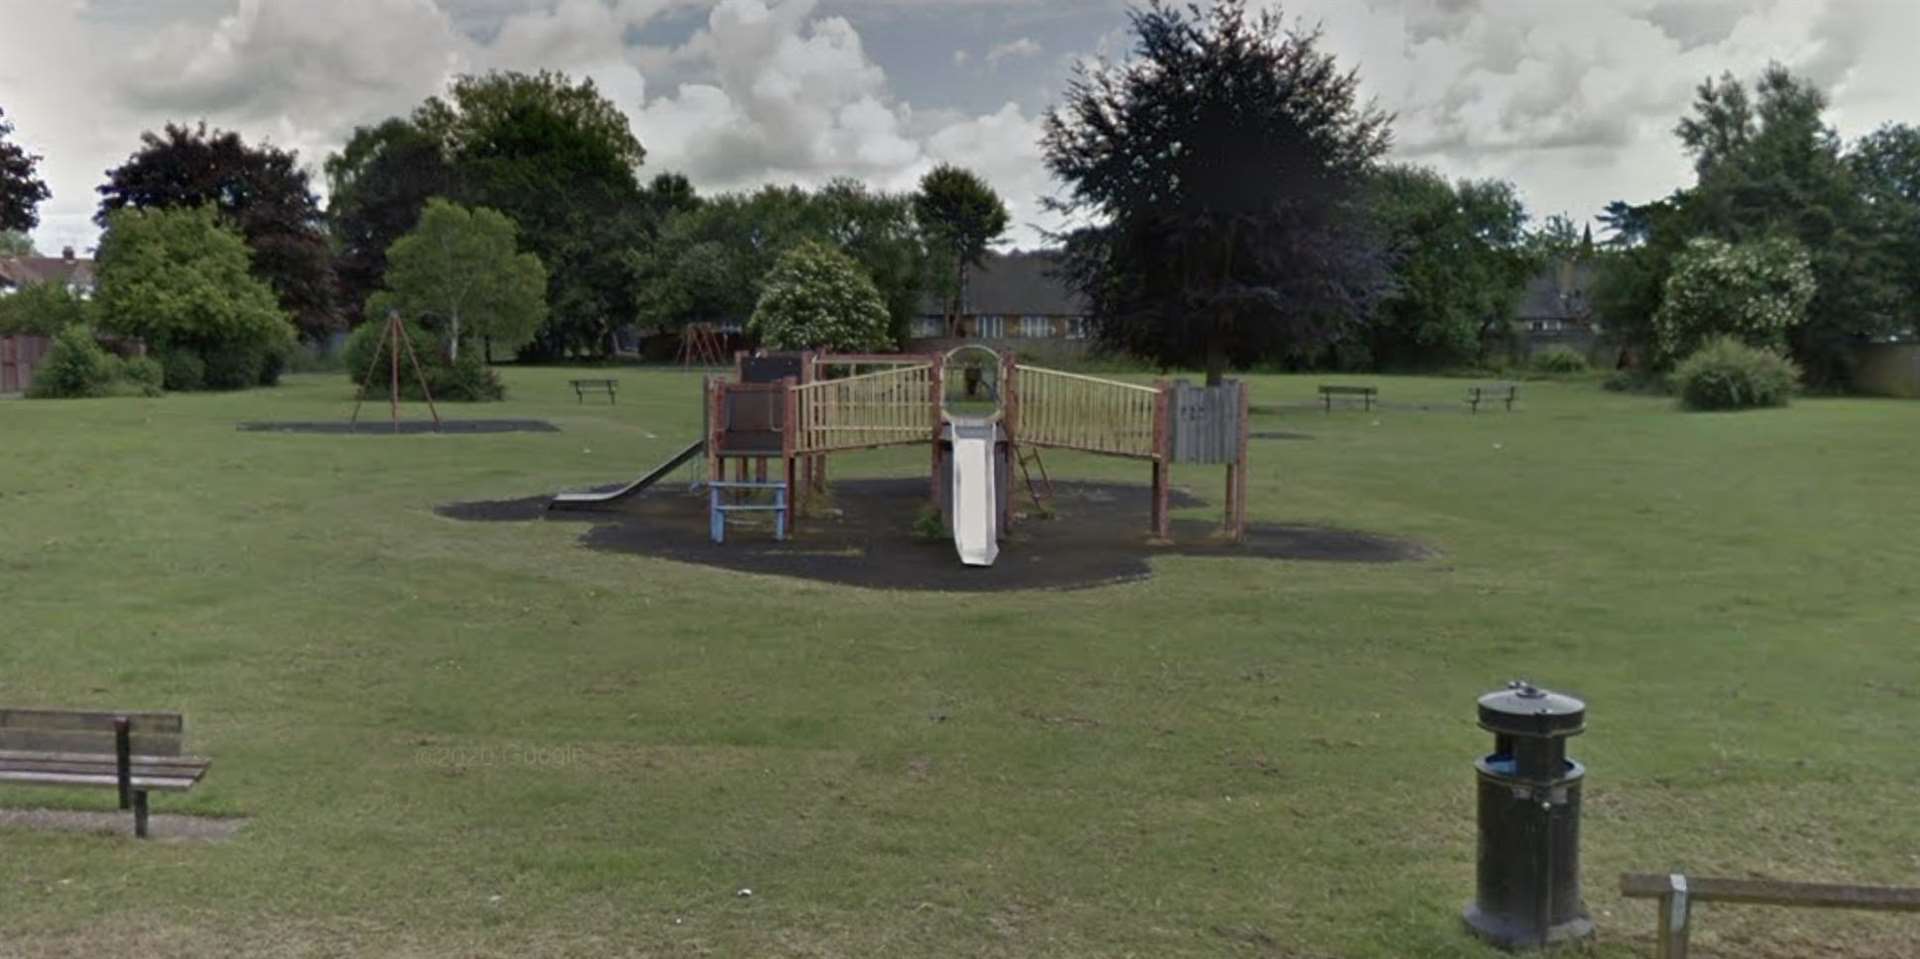 How the park looked before it was taken down in 2020. Picture: Google Street View